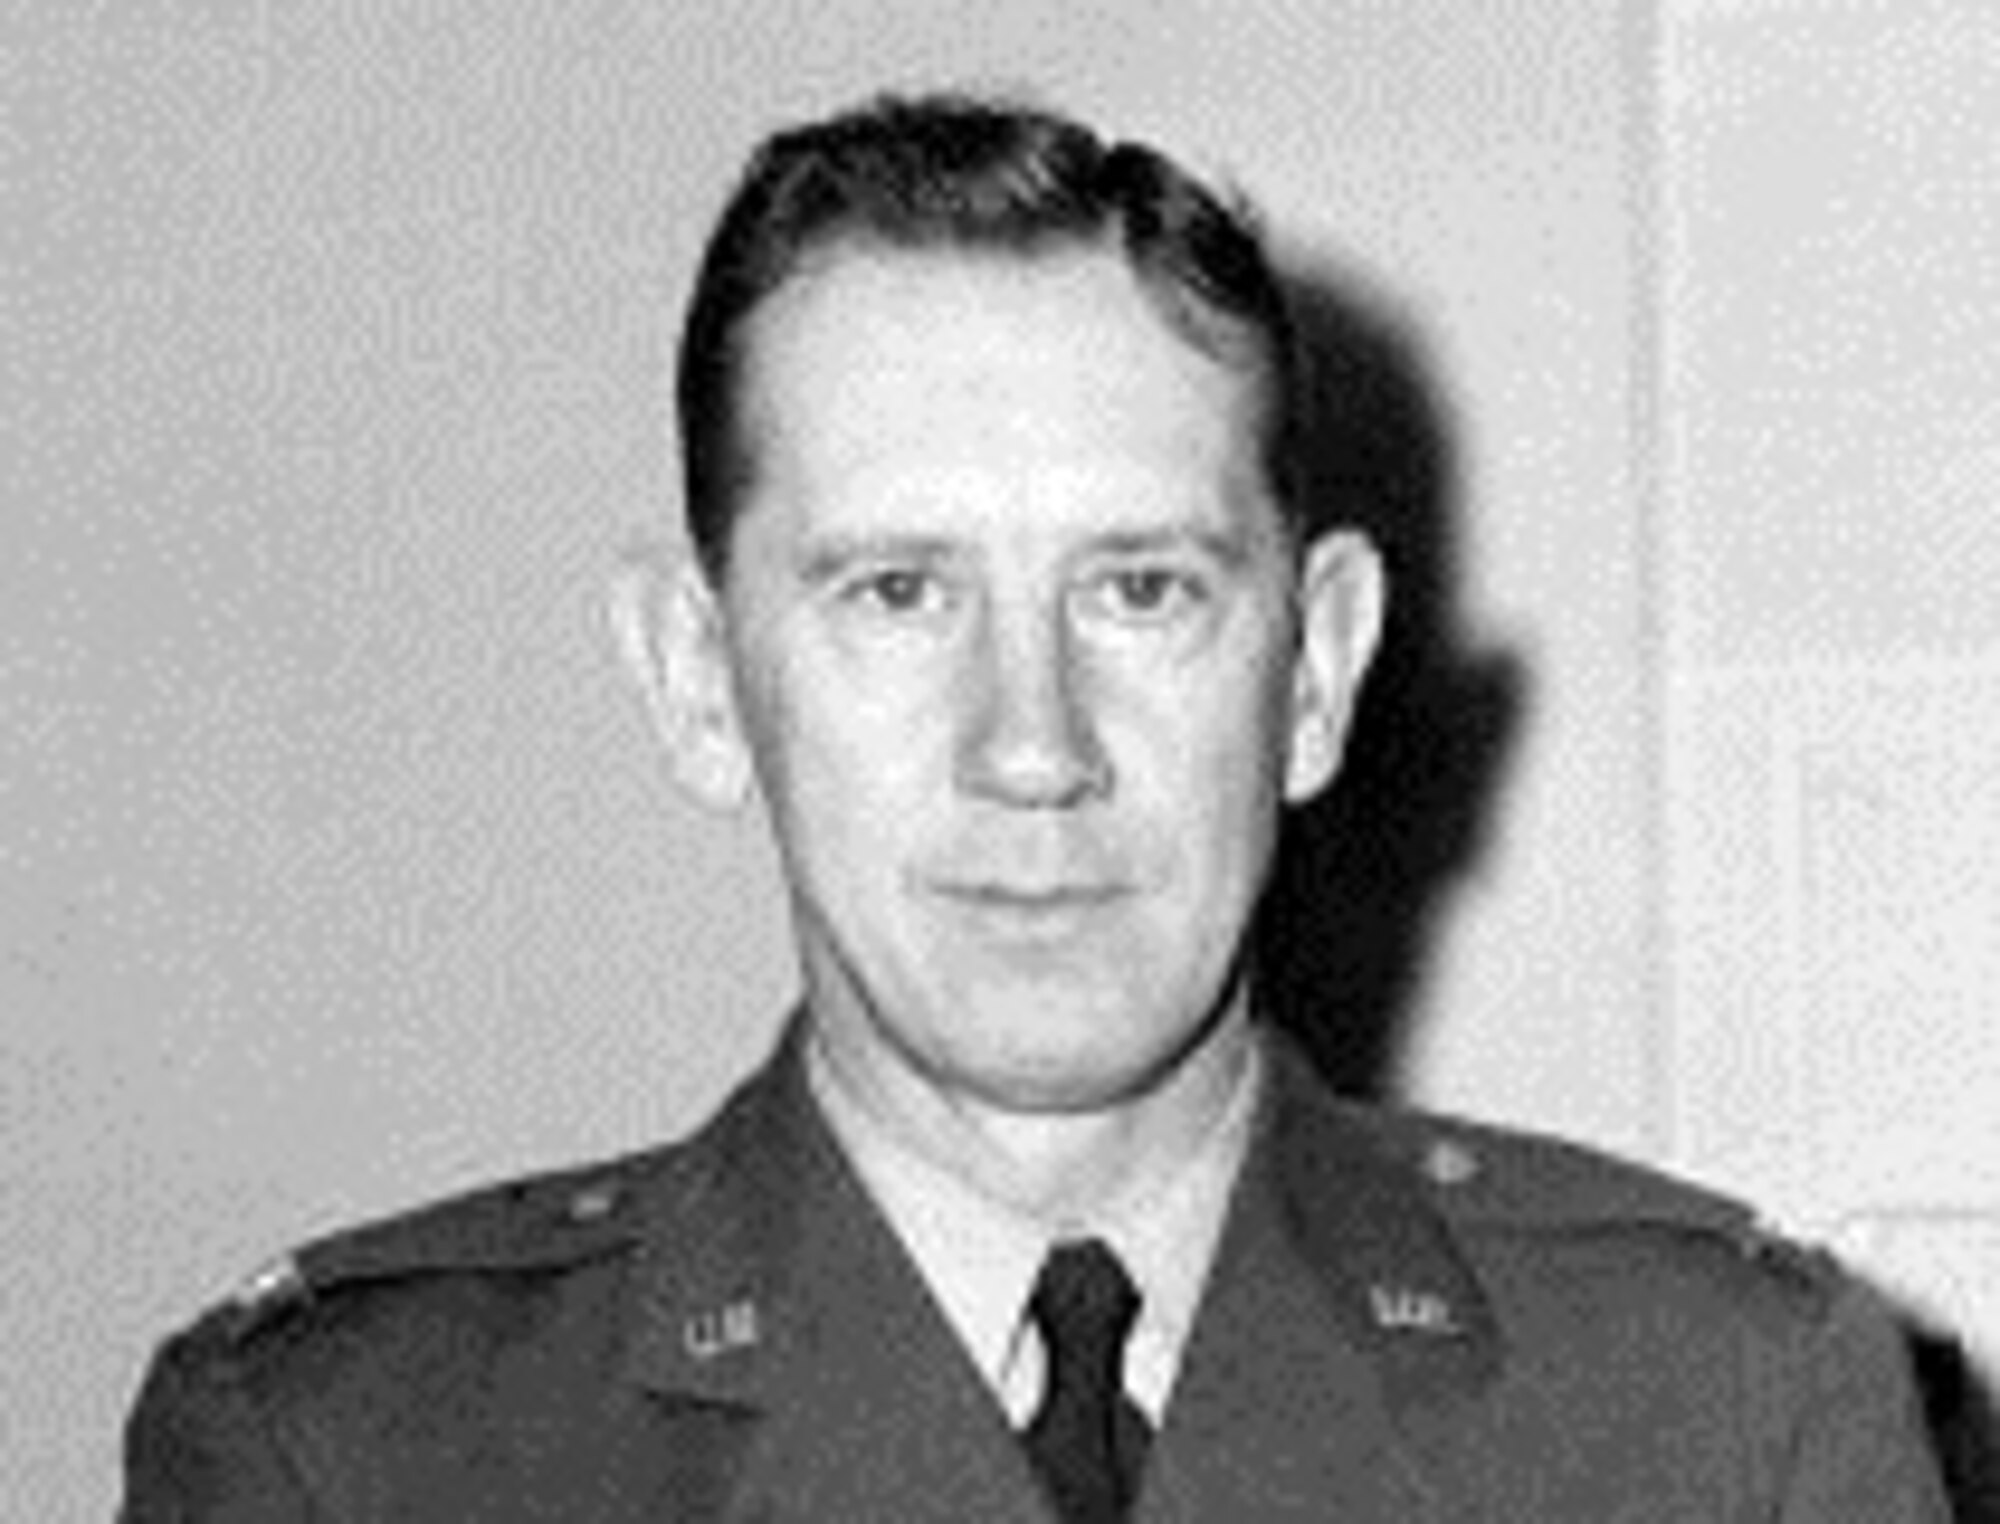 Little Rock Air Force Base's first installation commander, Col. Joseph A. Thomas, arrived Feb. 8, 1954. Thomas arrived three months into base construction during a time when local union members were picketing the base for non-payment for overtime worked.  While Thomas oversaw construction and solved labor problems, his primary mission was to promote an environment of community understanding and acceptance. Before Thomas' death June 28, 1955, he oversaw the completion of the gas distribution system, several buildings, and railroad system.